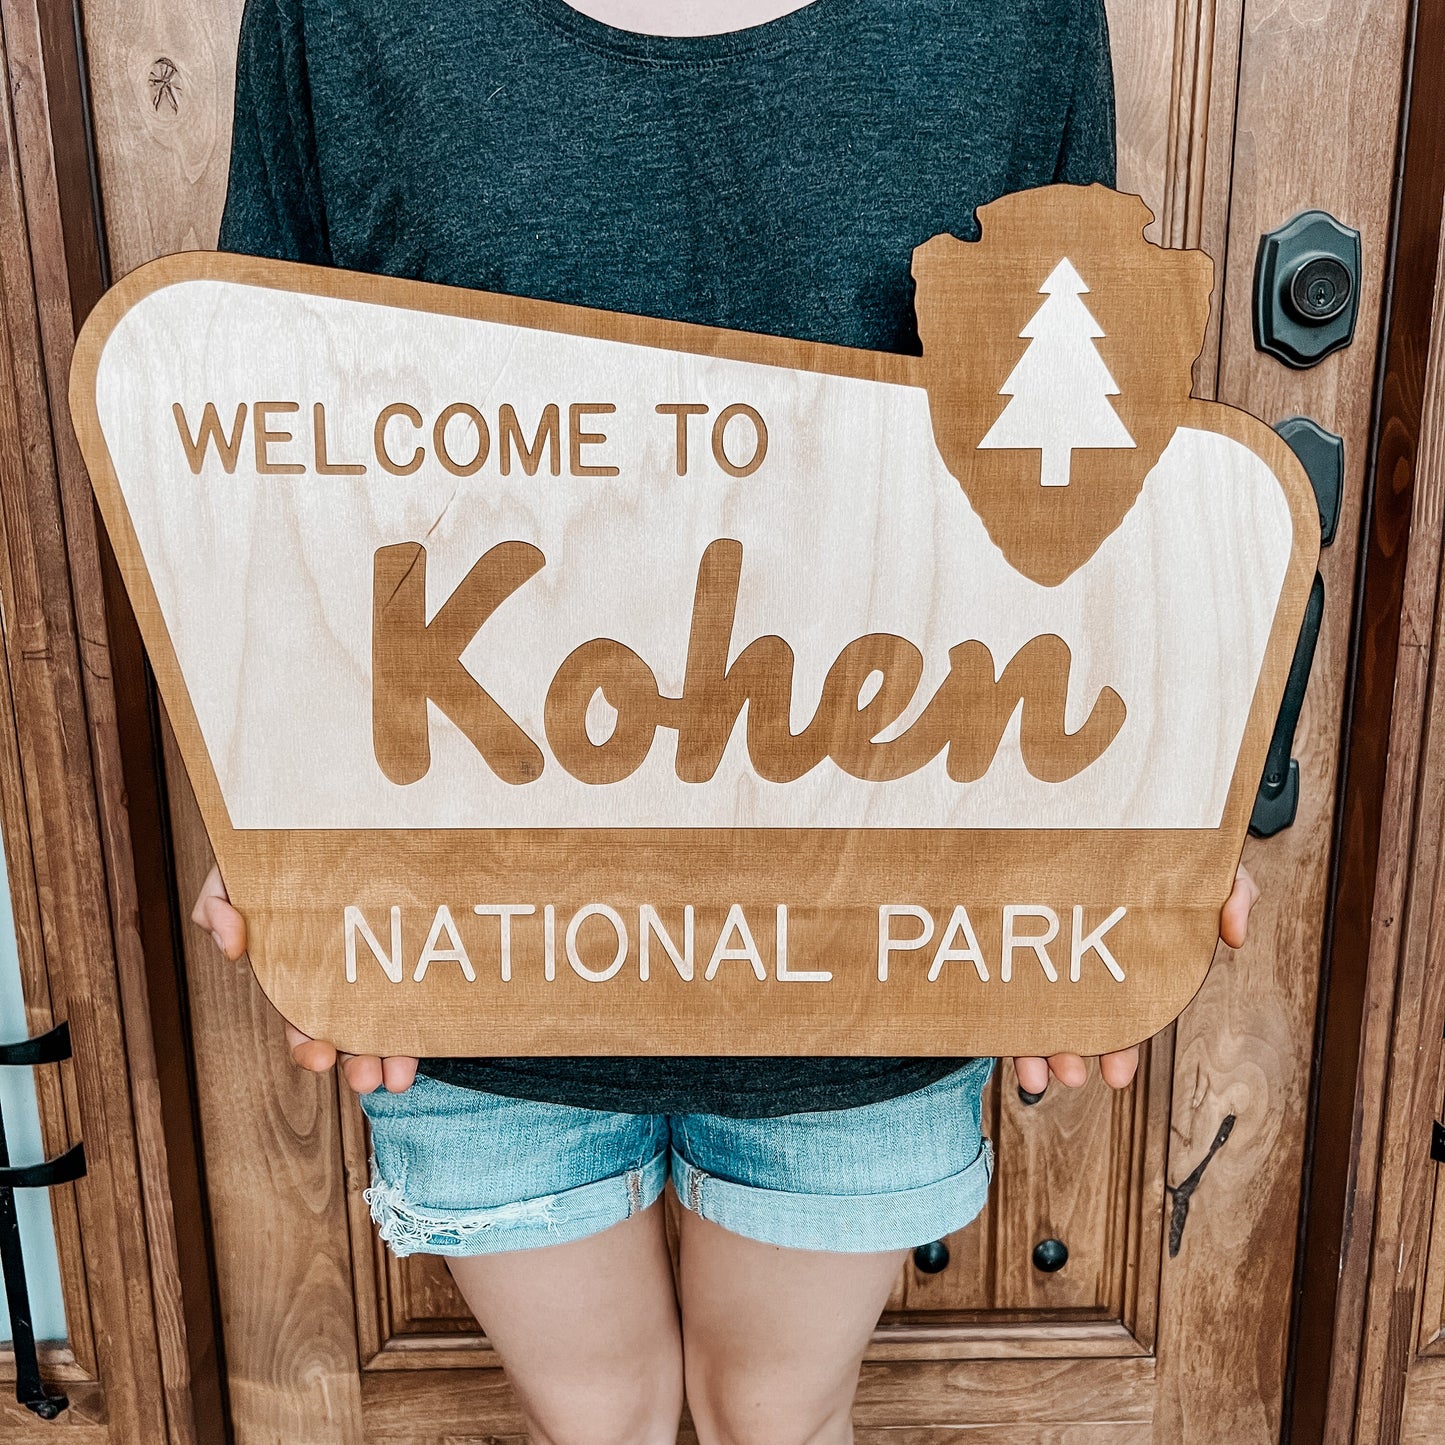 National Park Sign / Baby Name Sign / Last Name Sign / Wooden Name Sign / Baby Announcement Sign / Family Name Sign